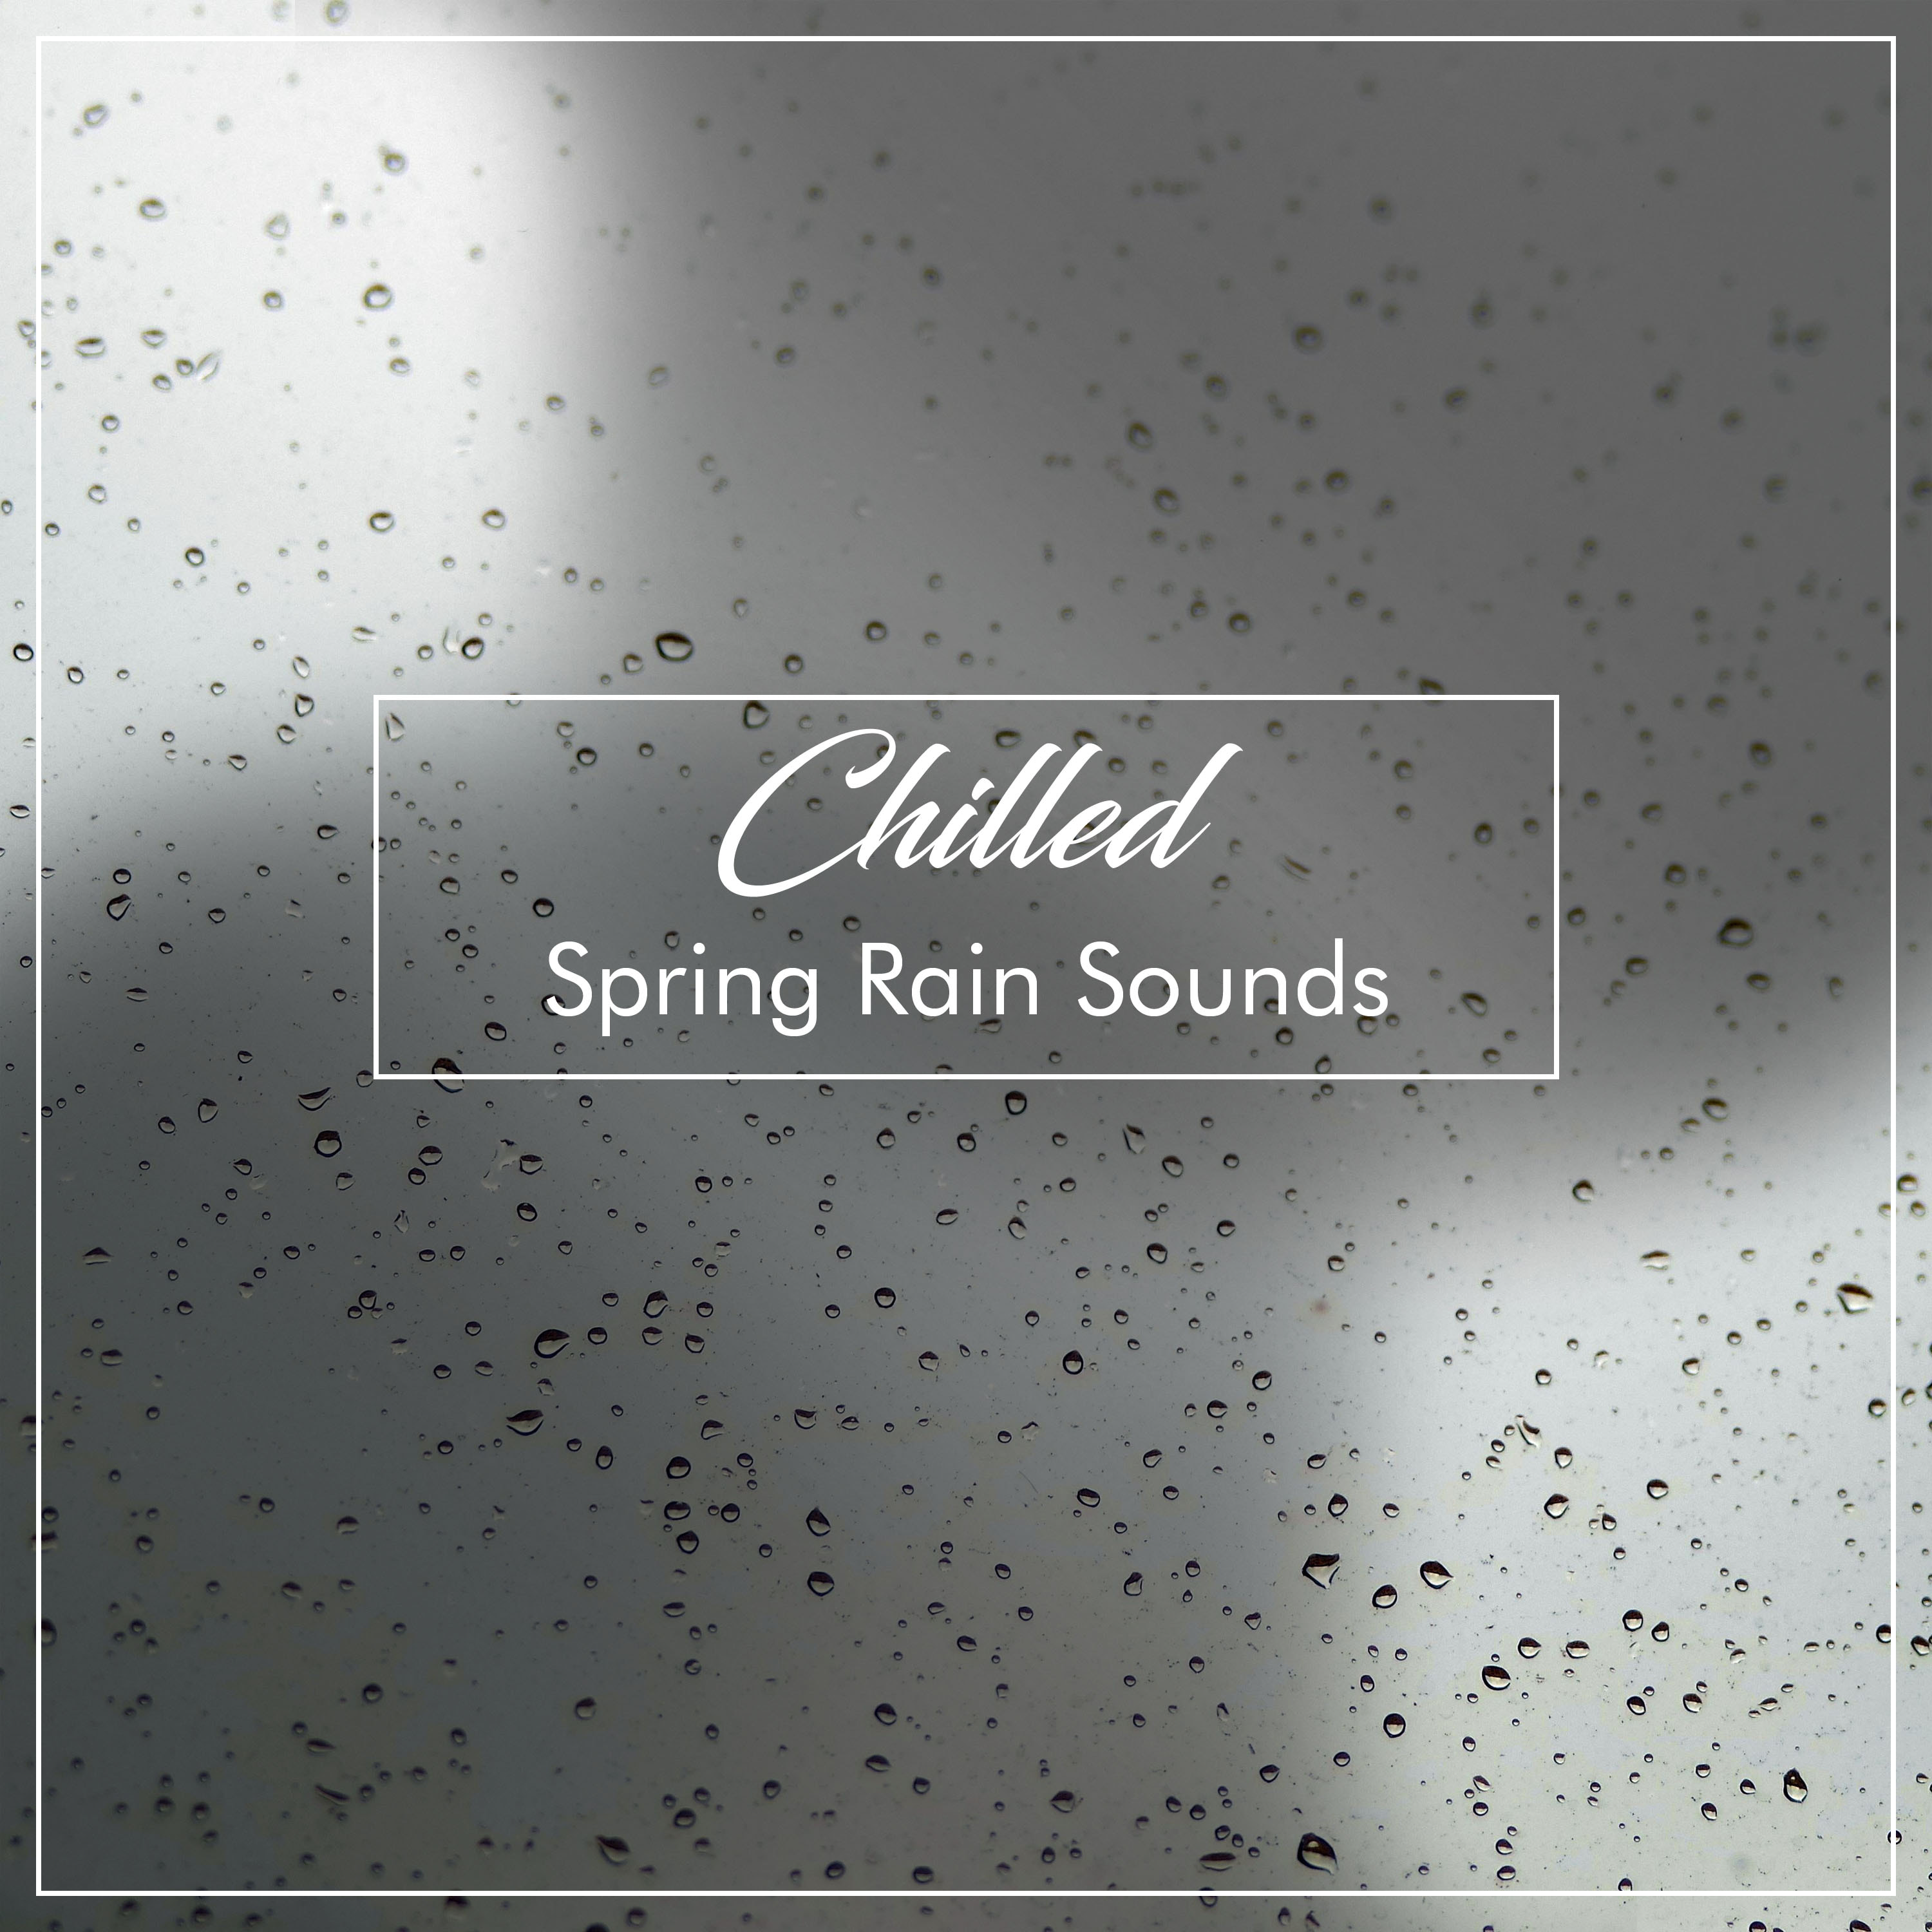 #12 Chilled Spring Rain Sounds